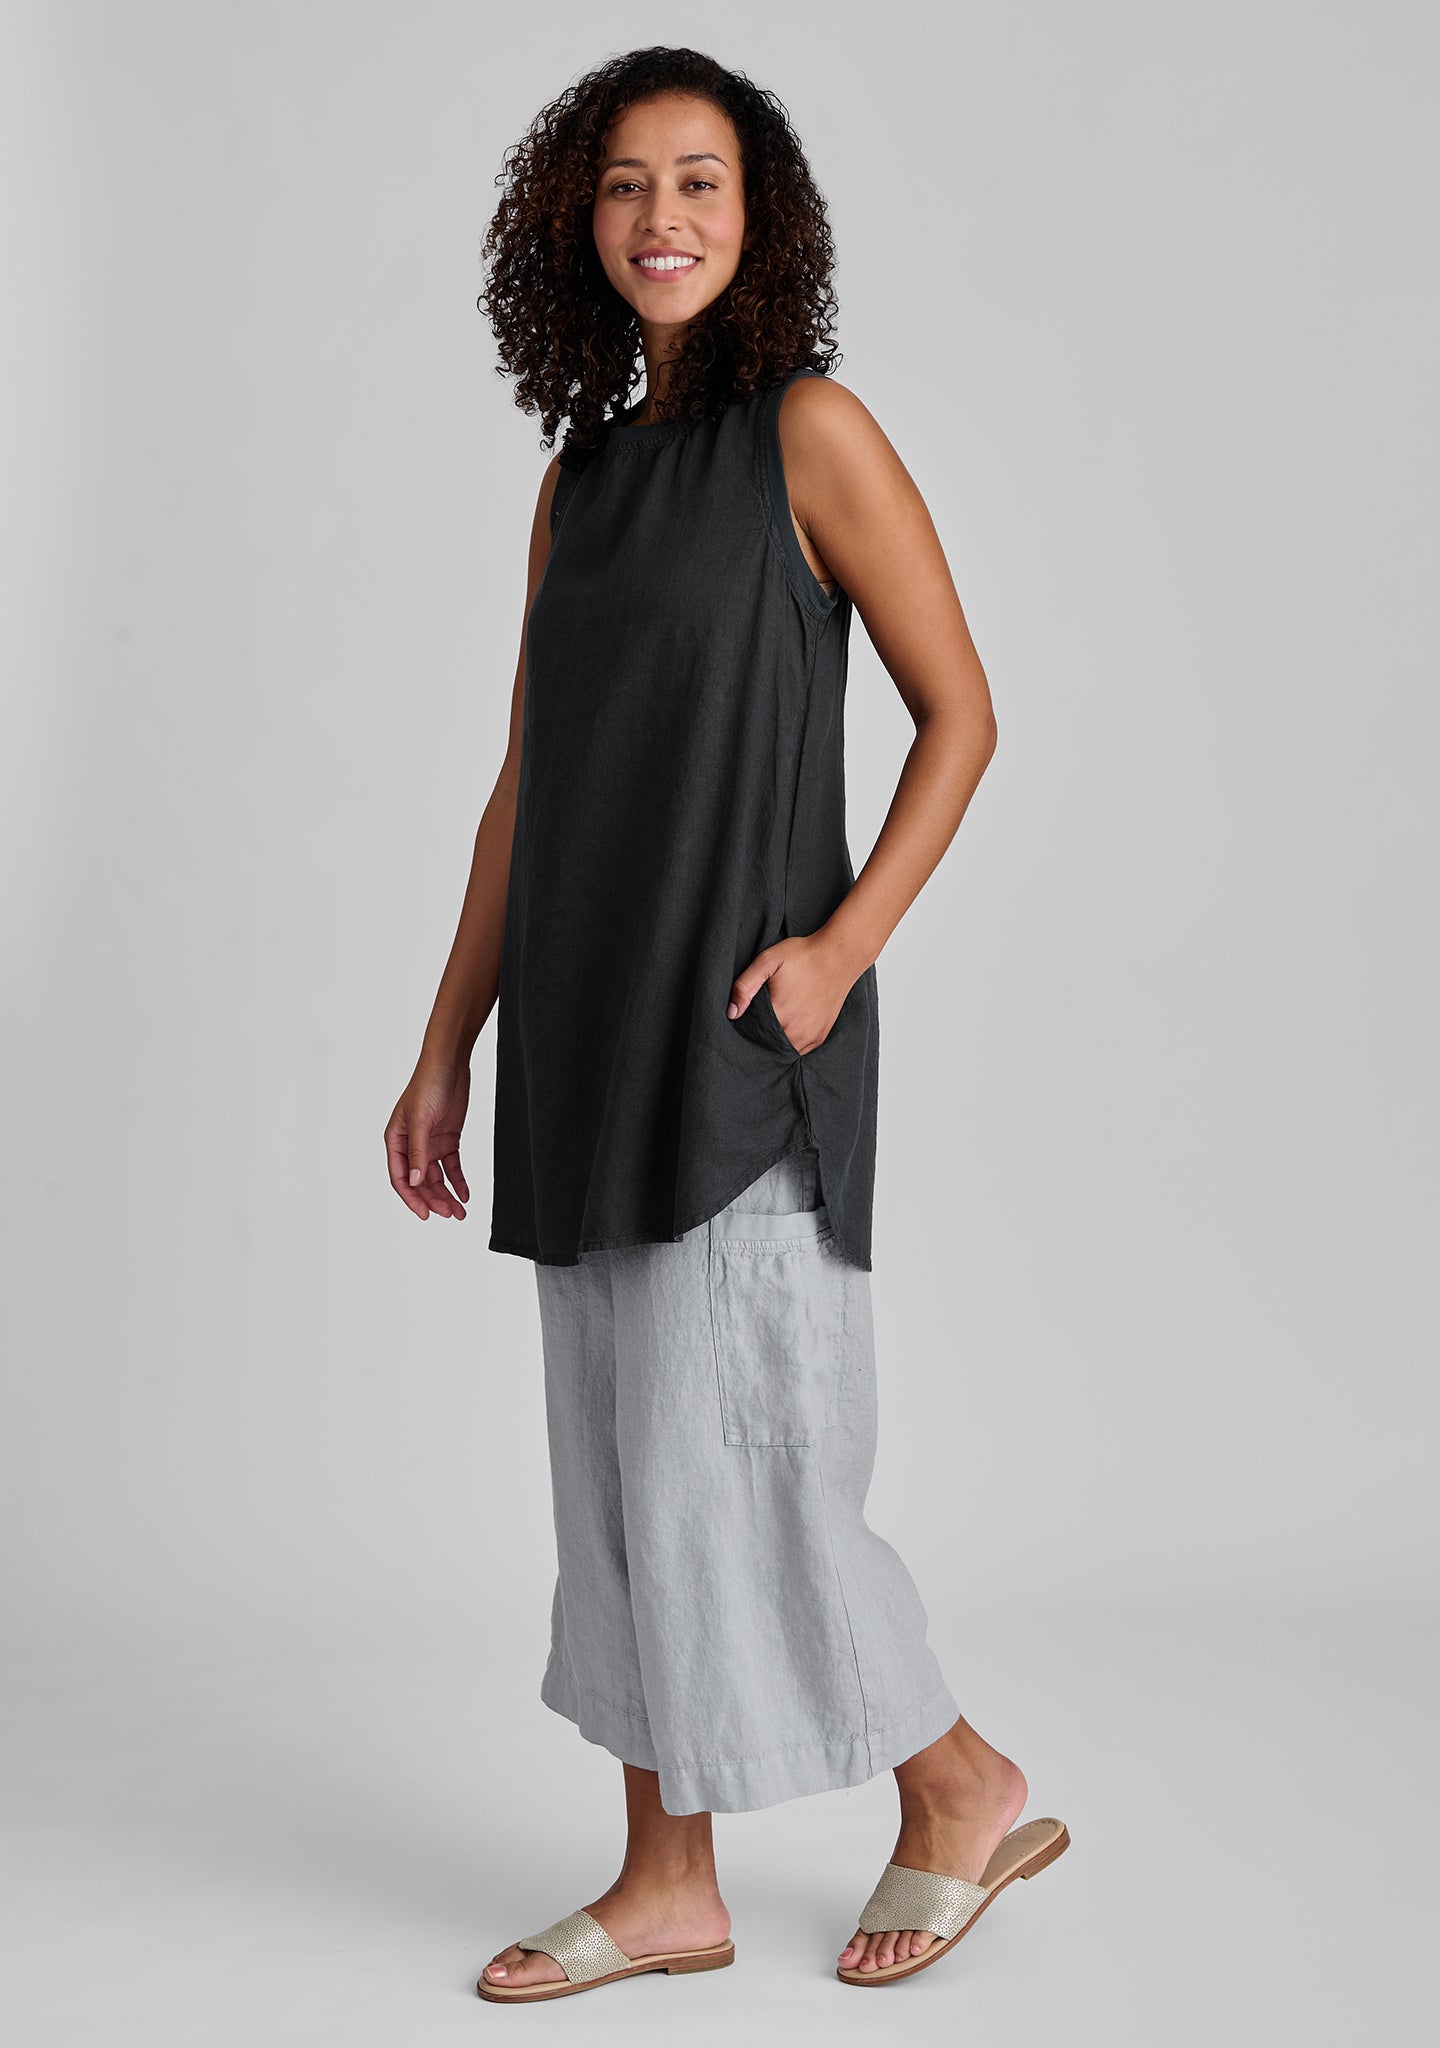 FLAX linen tank in black with linen pants in grey